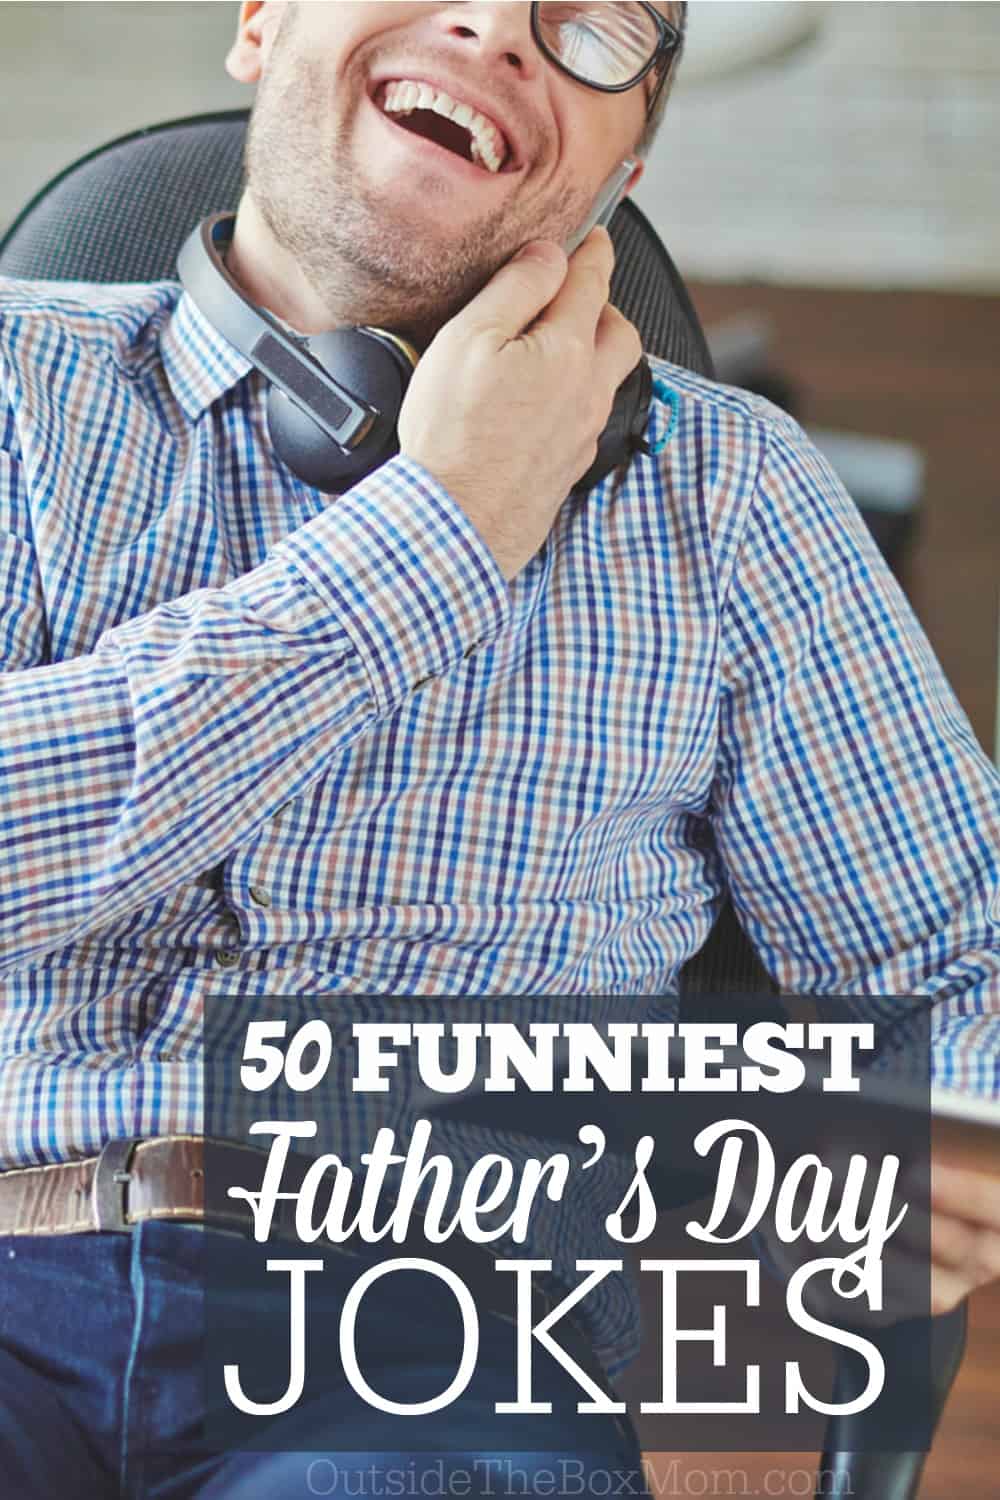  These father's day jokes will have you laughing and learning at the same time. It includes dad wisdom, funny things dads say and conversations with dad to keep you entertained.